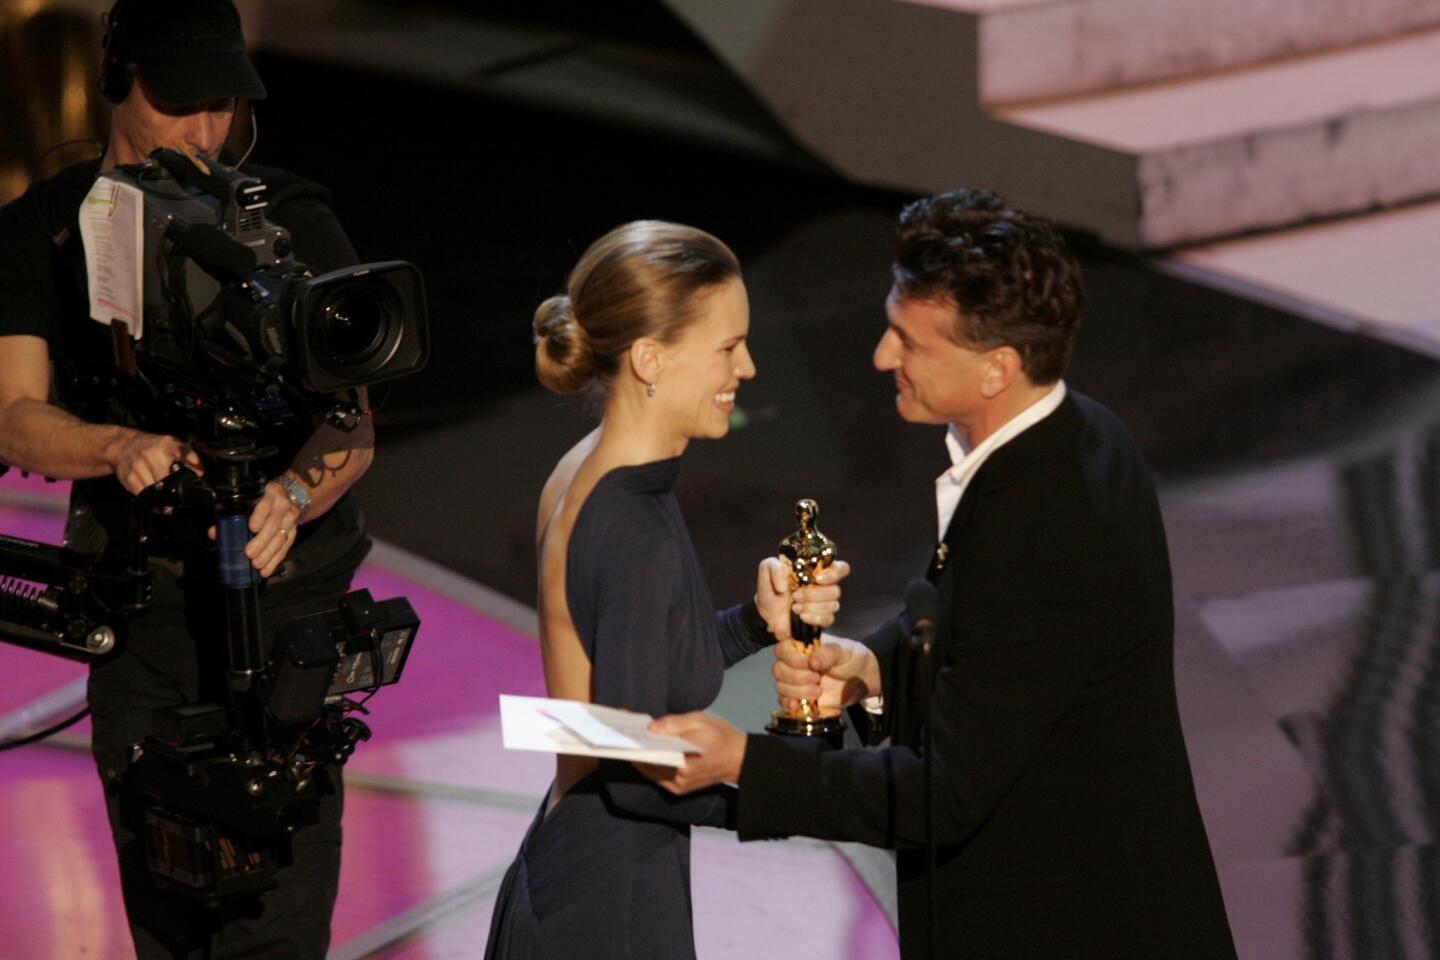 The 77th Academy Awards assigned stand-up comedian Chris Rock to the hosting post, foreshadowing a night of ruder-than-usual digs at celebrities for laughs. Take this for example: "Who is Jude Law?" Perhaps actor Sean Penn thought that Law forgot his armor, stepping onstage to defend his peer.